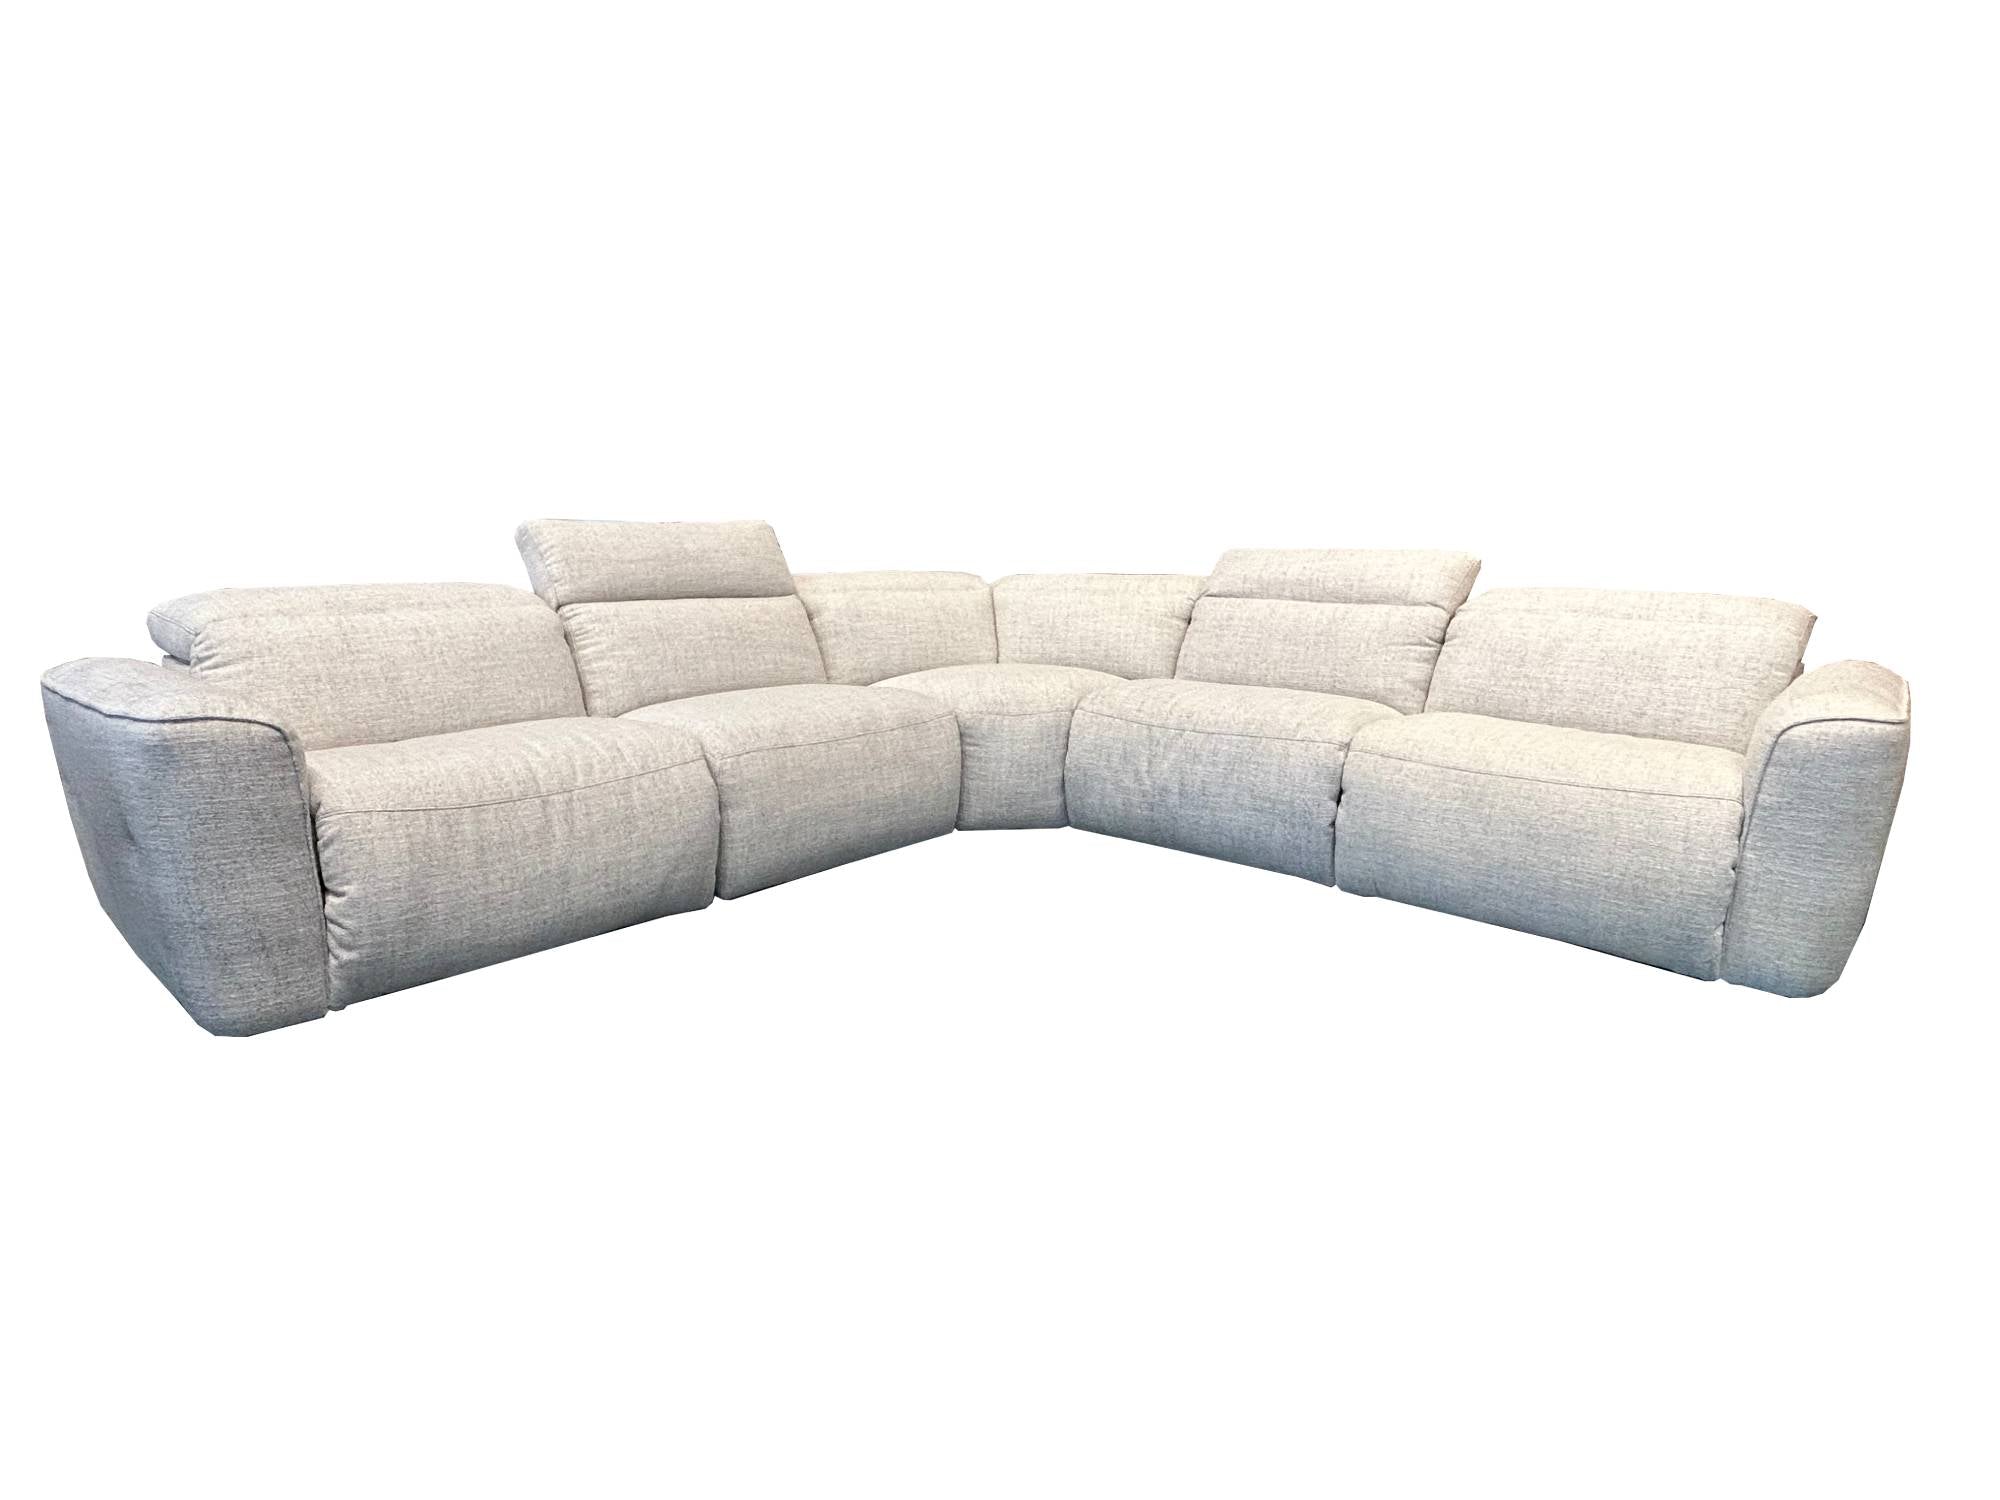 Nomad Stone Sectional - Rug & Home